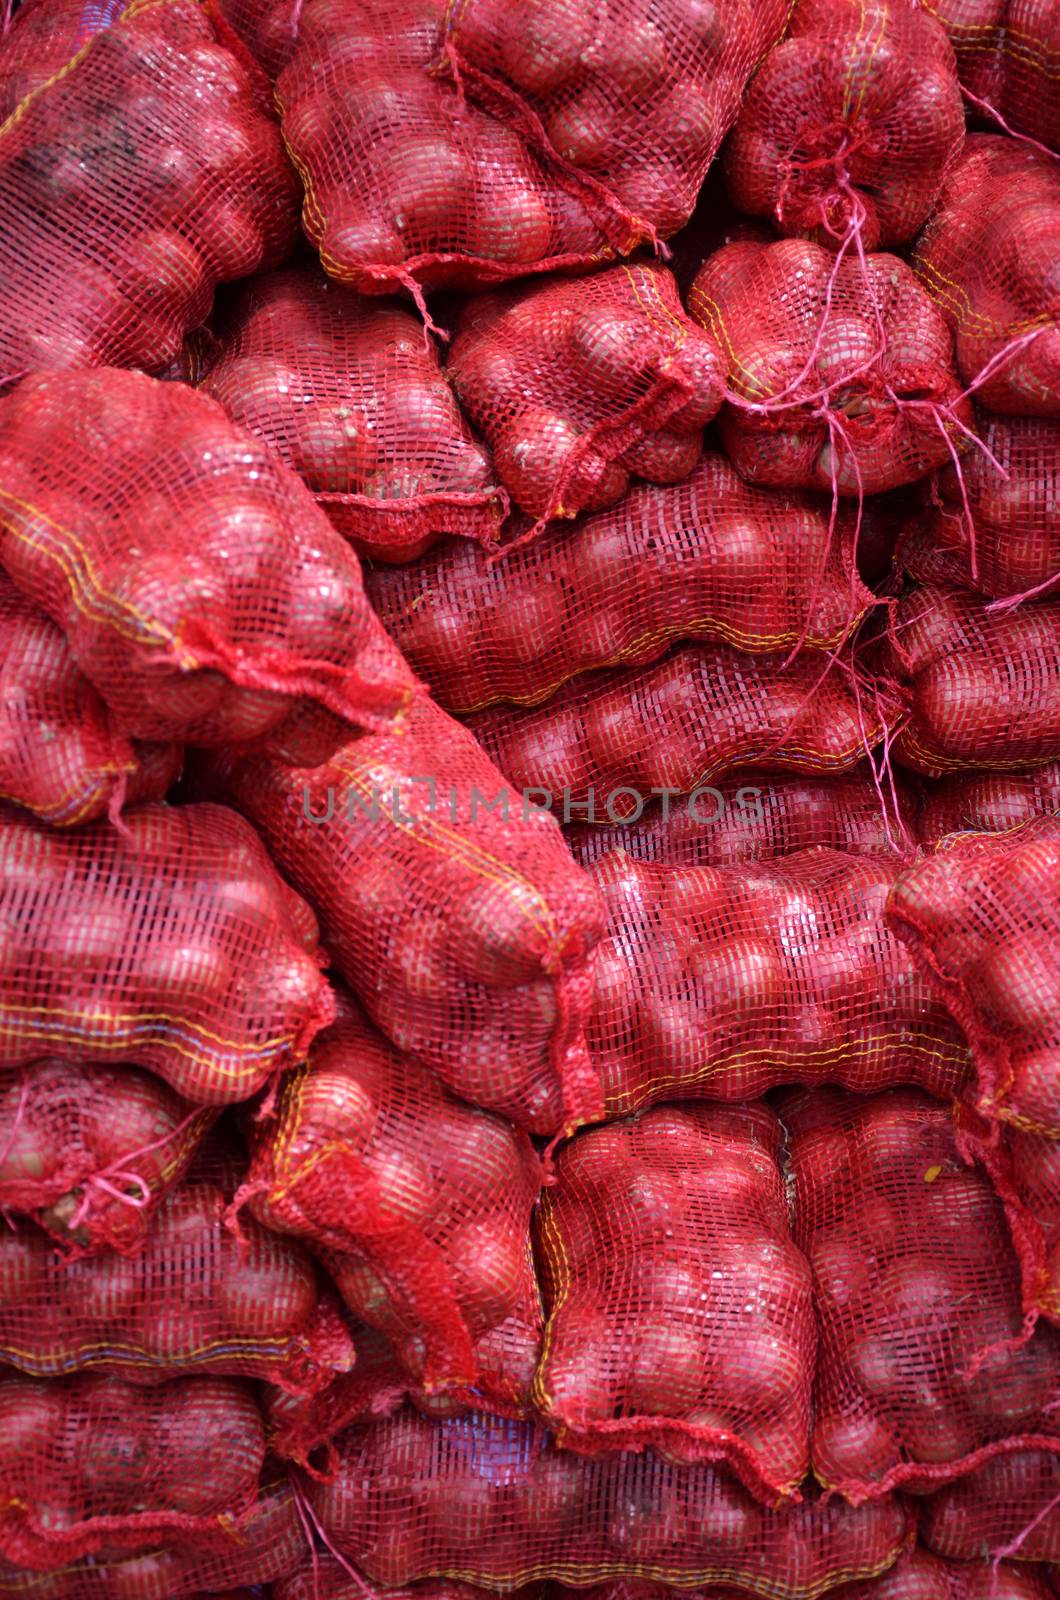 Sacs containing Large onion stacked for sale at Local Market at Little India, Singapore